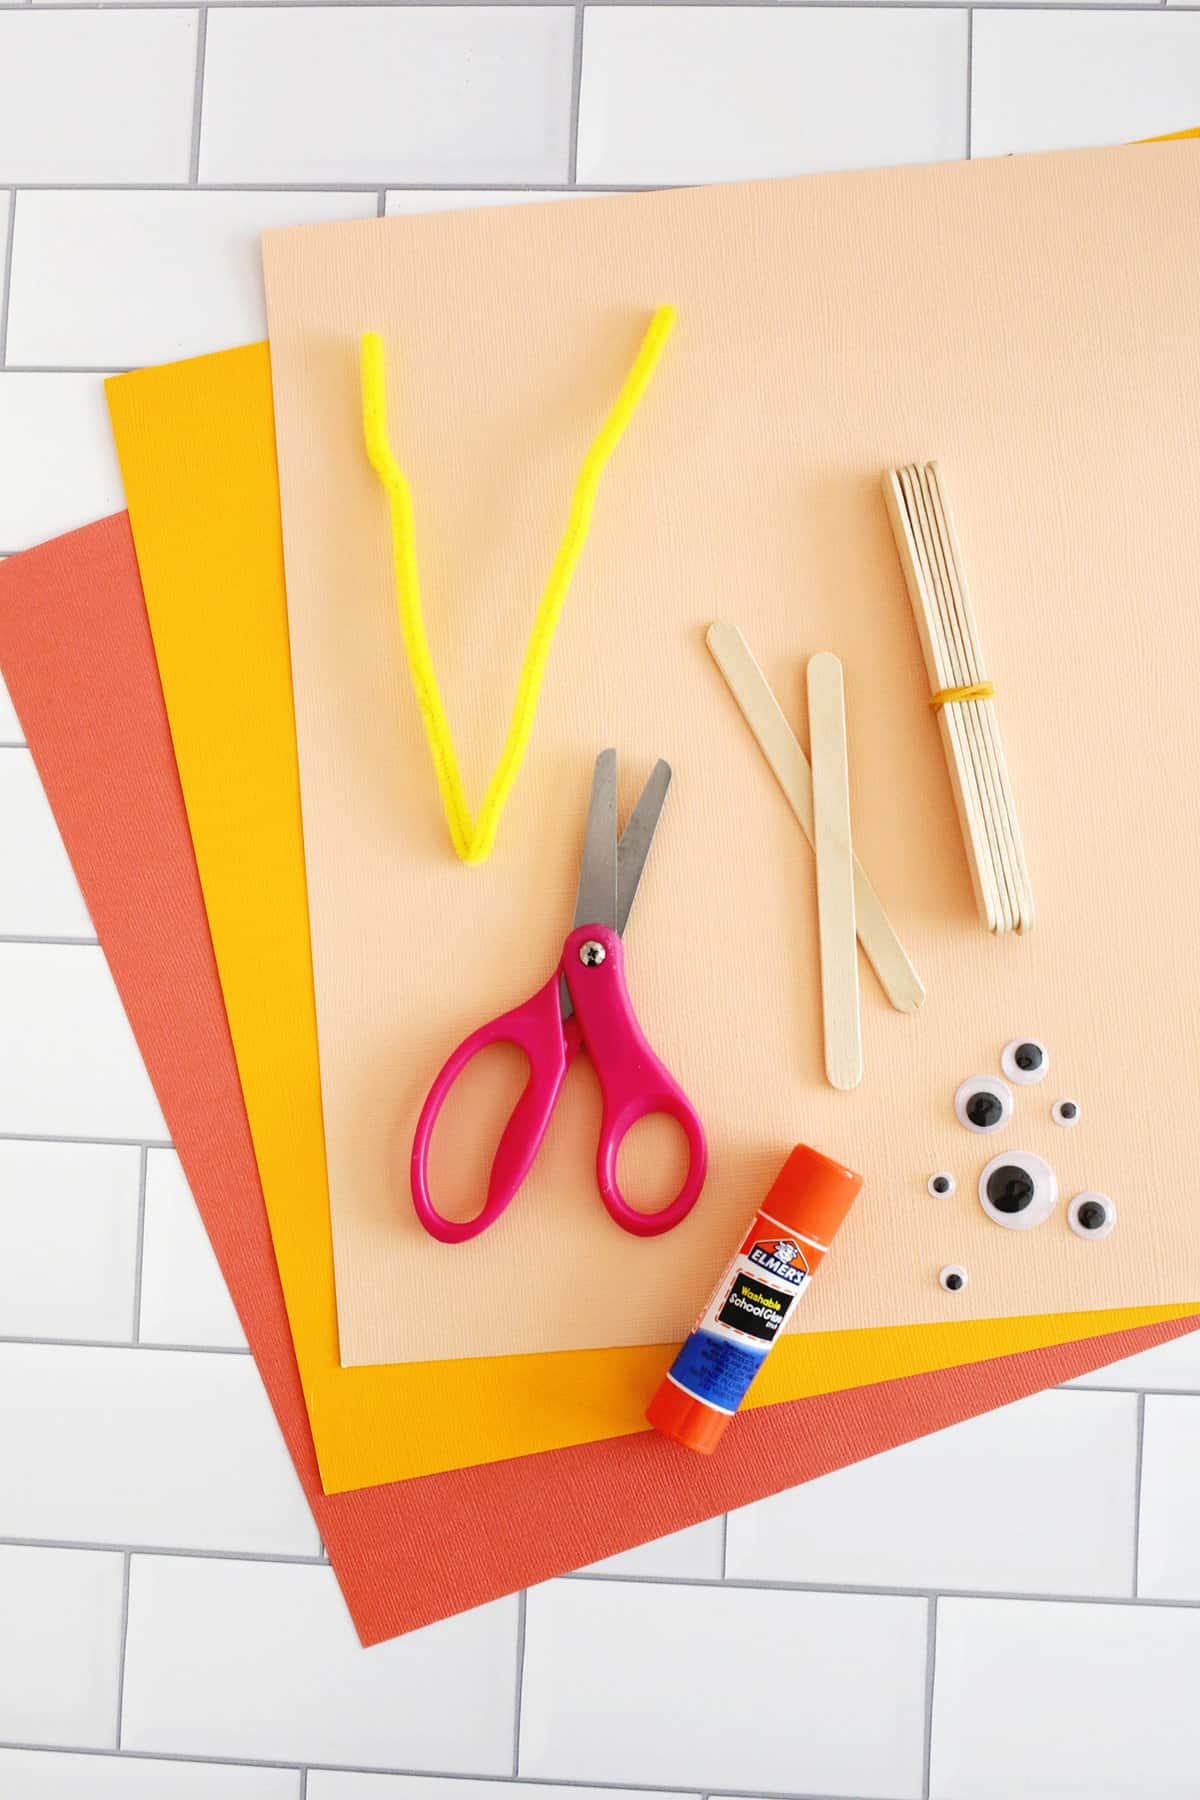 cardstock, scissors, glue, popsicle stick and googly eyes on a counter. 